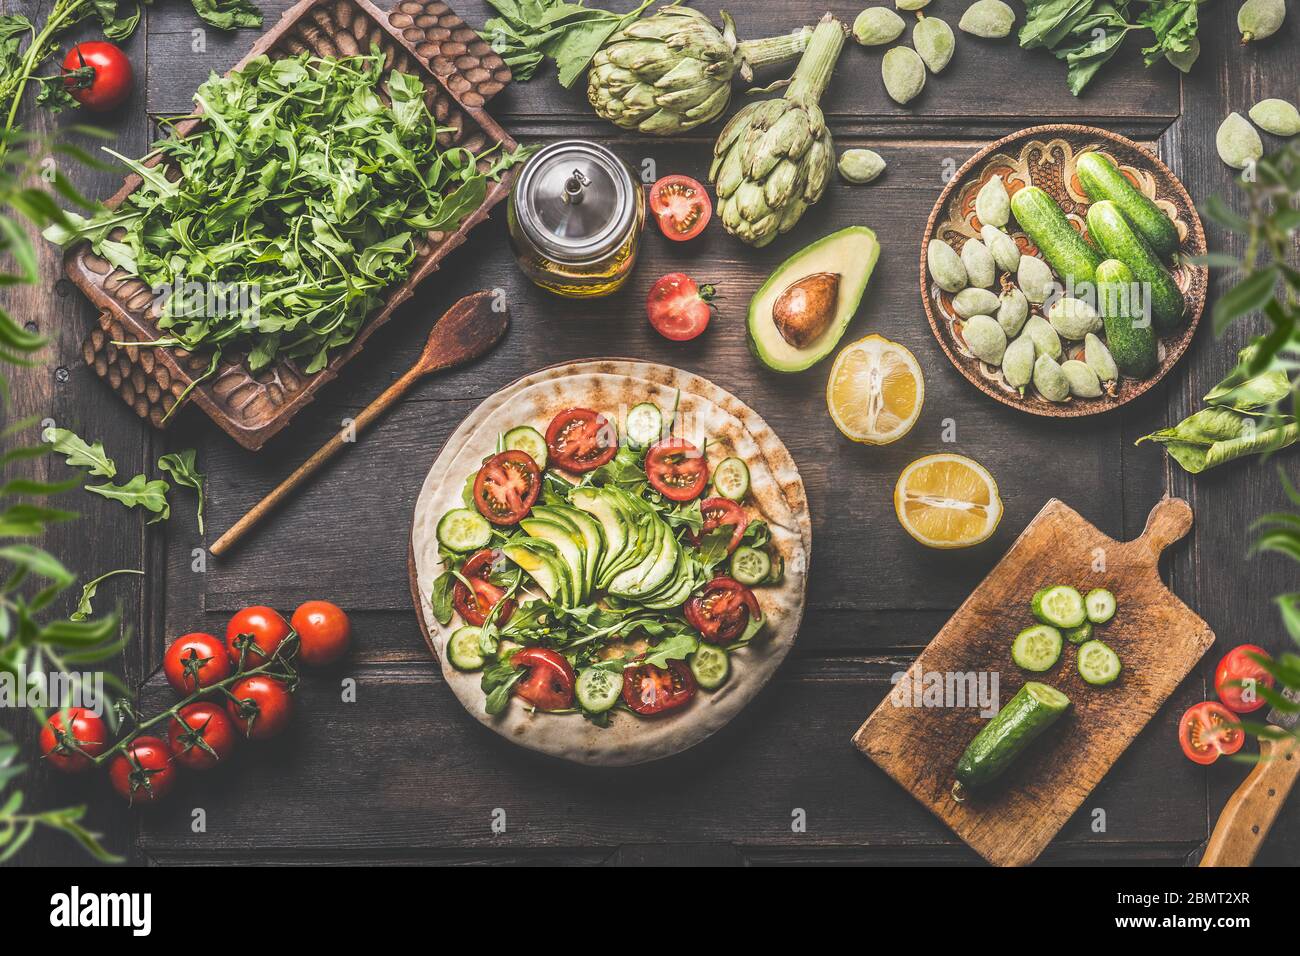 Healthy lunch making preparation. Tortilla wraps with fresh vegetables, avocado , olives oil and lemon on rustic wooden kitchen table , top view. Cook Stock Photo